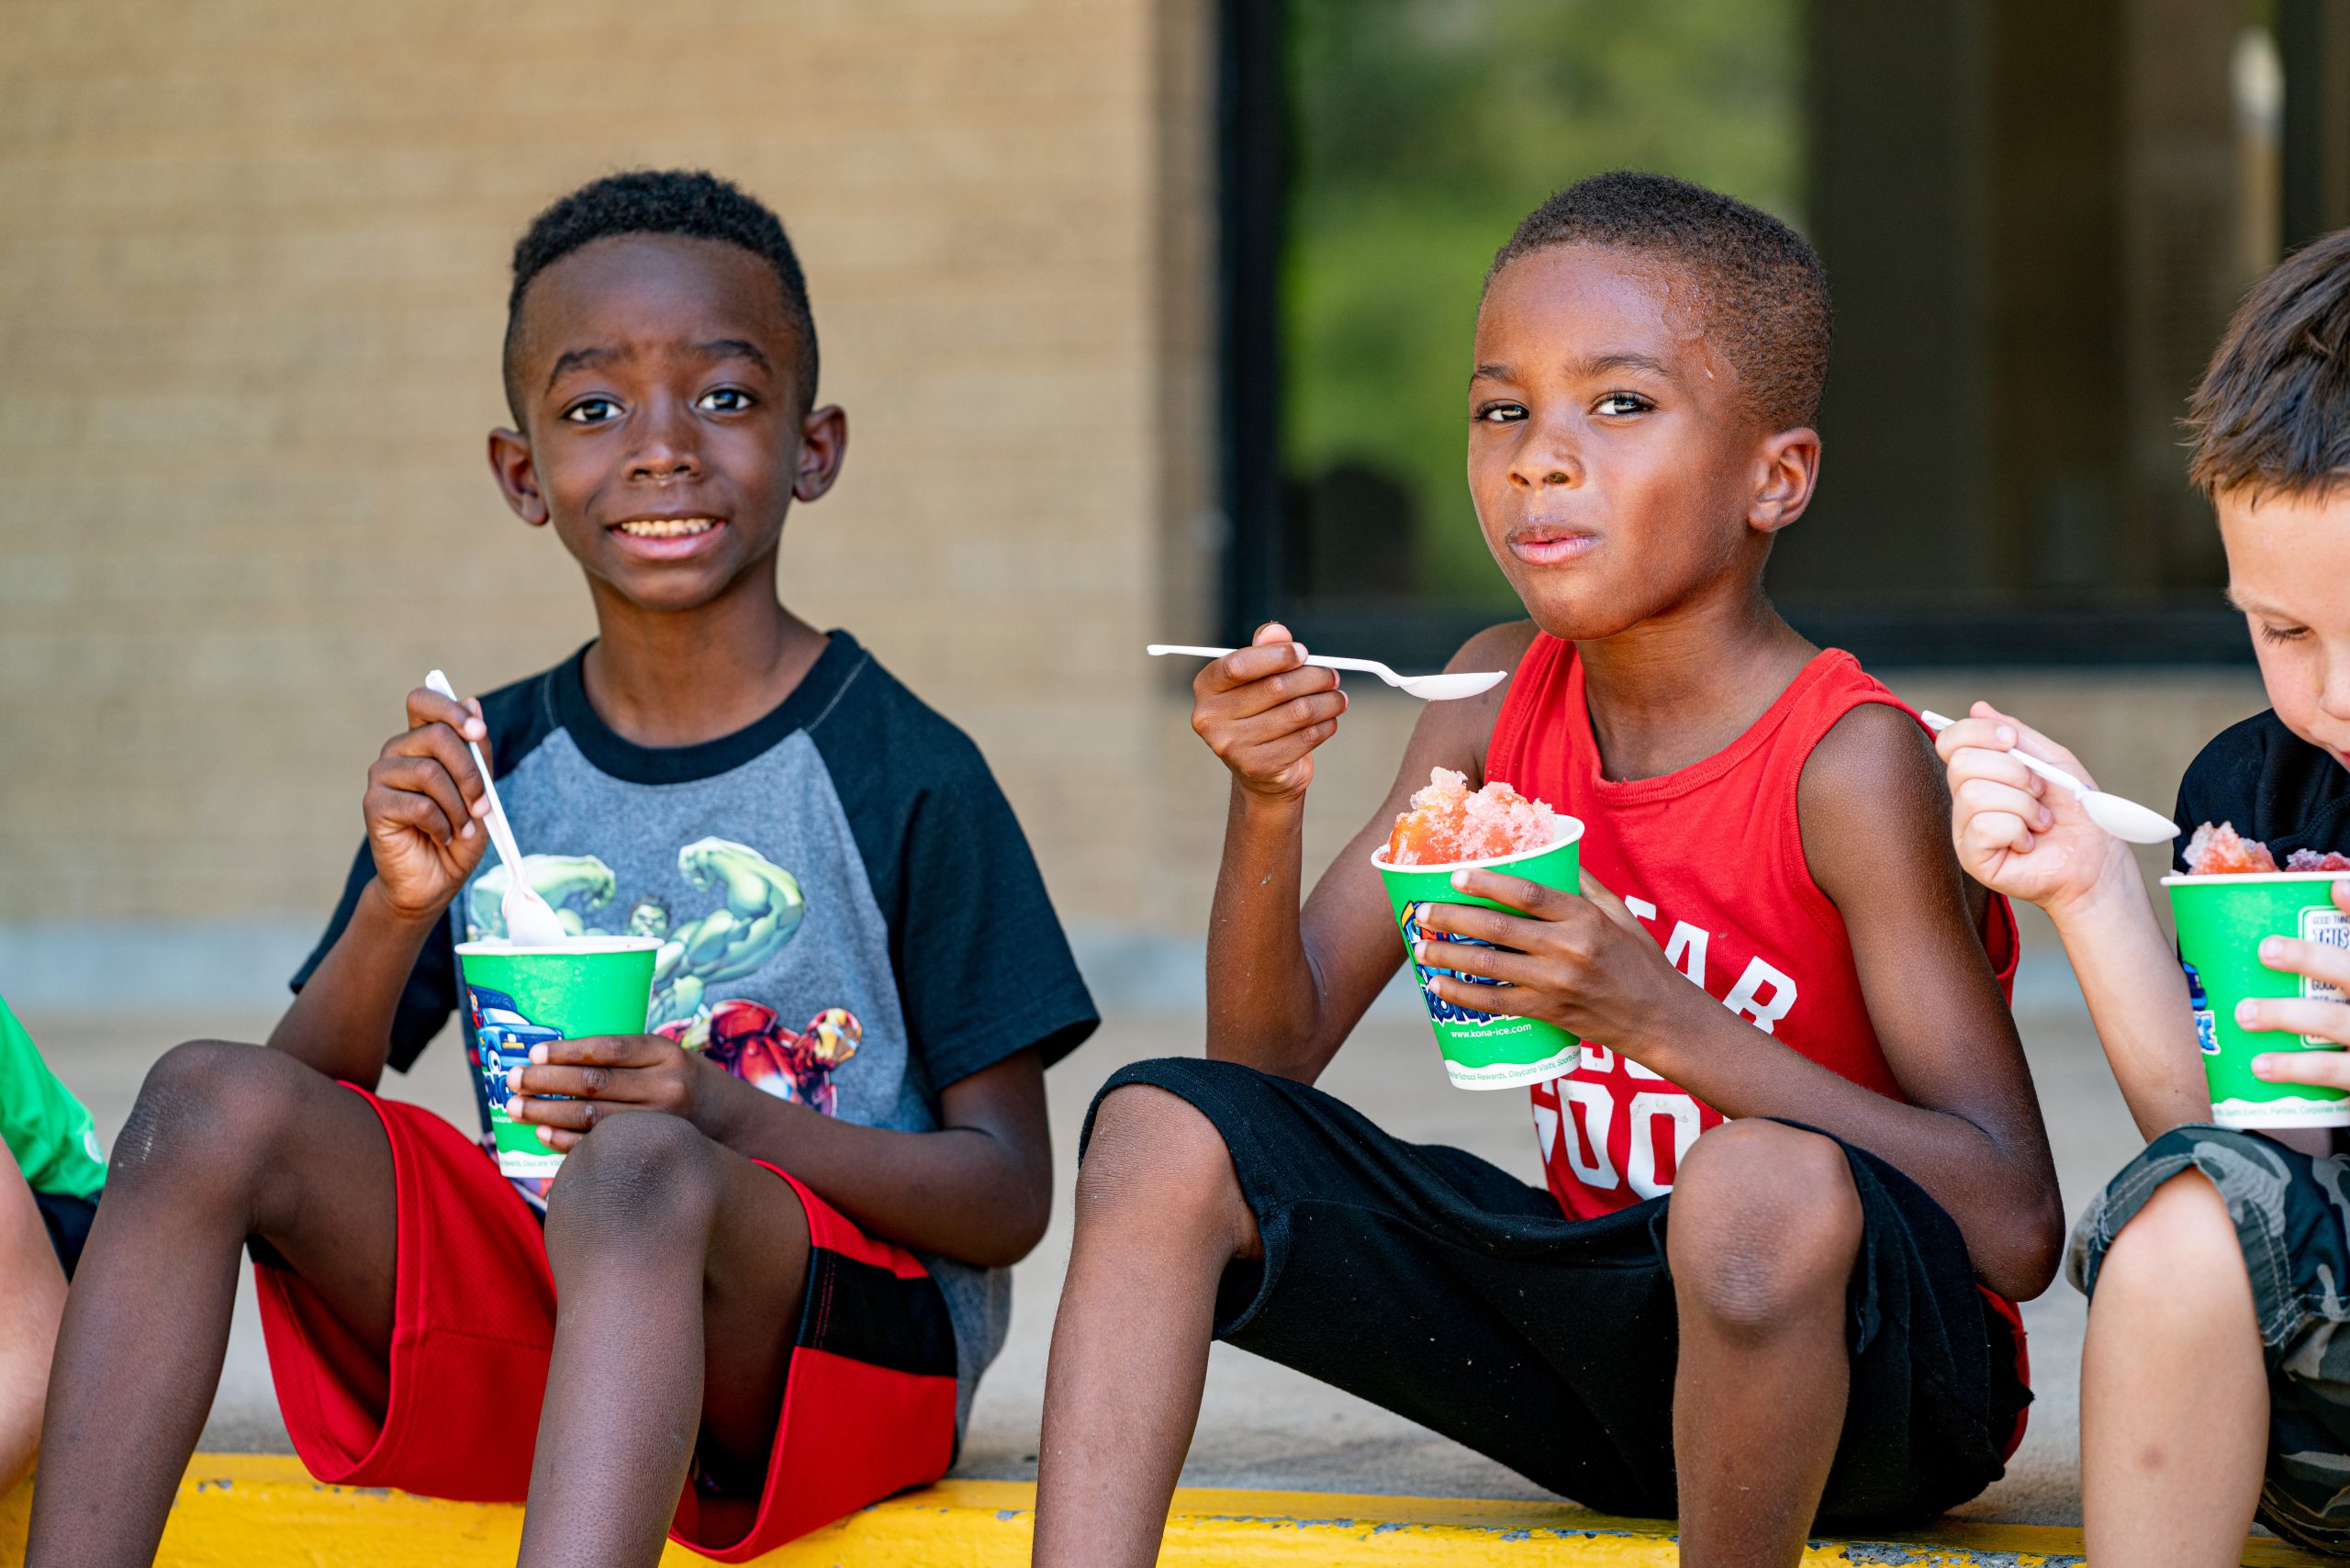 Two boys sitting eating snow-cones